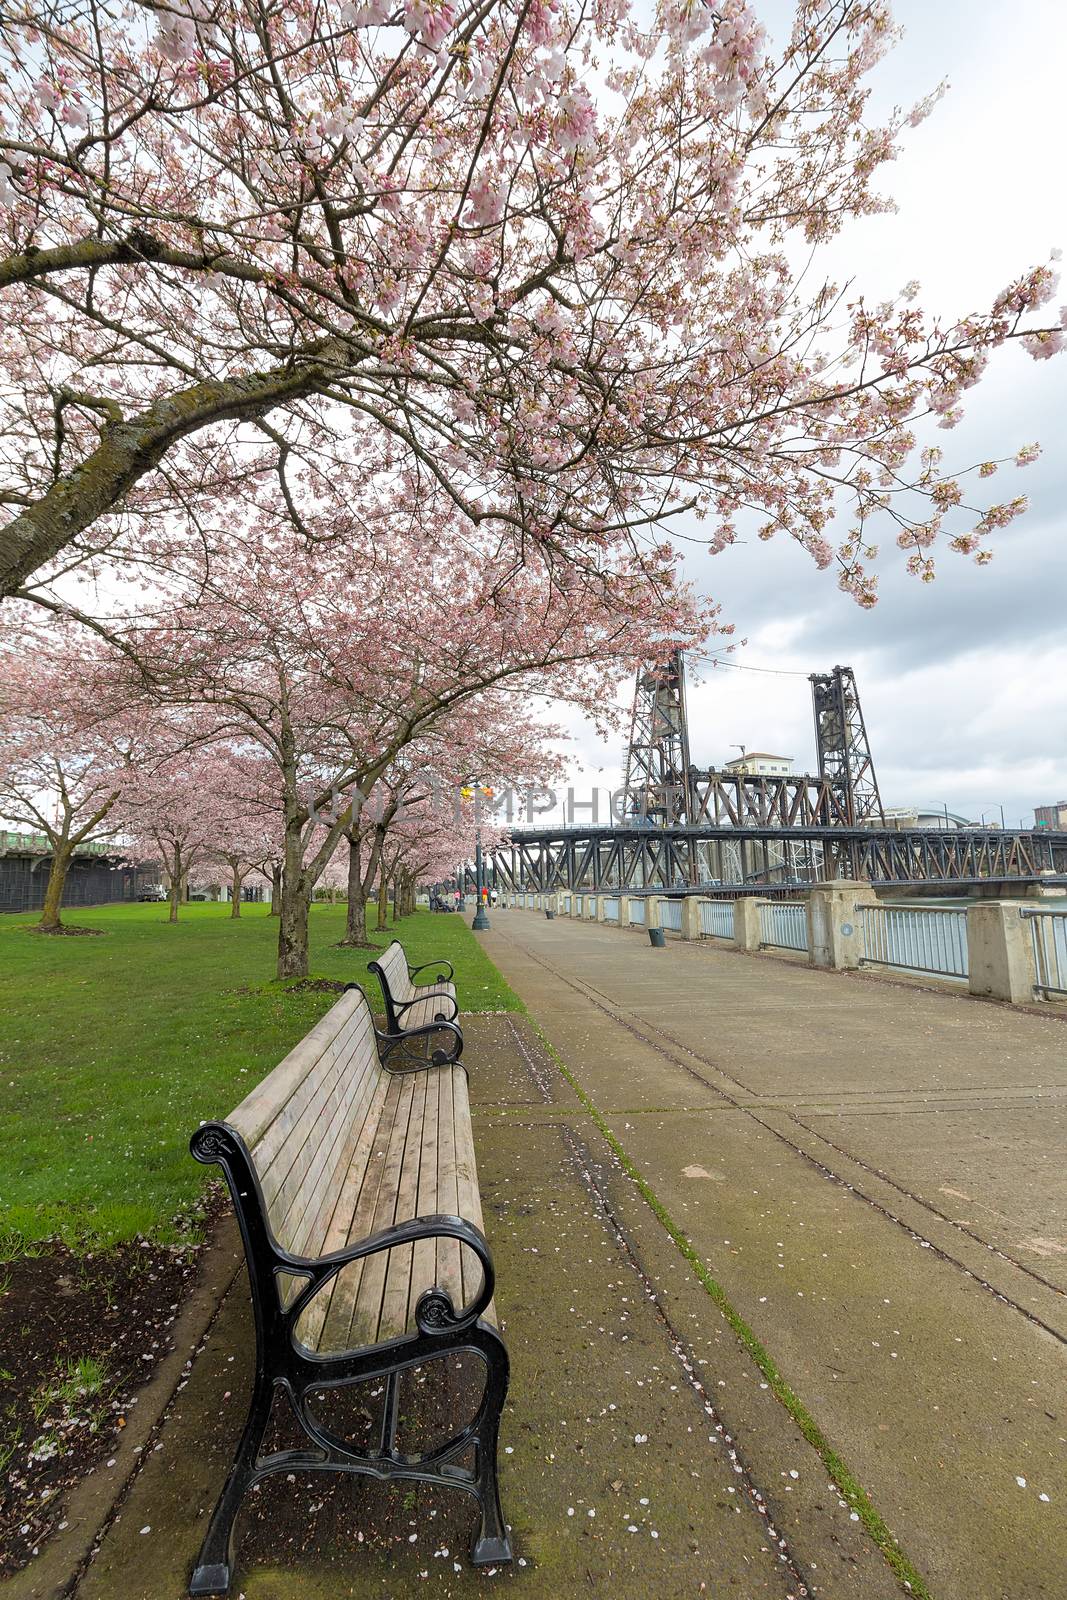 Park Benches under Cherry Blossom trees along Portland Oregon waterfront by Steel Bridge in Spring season